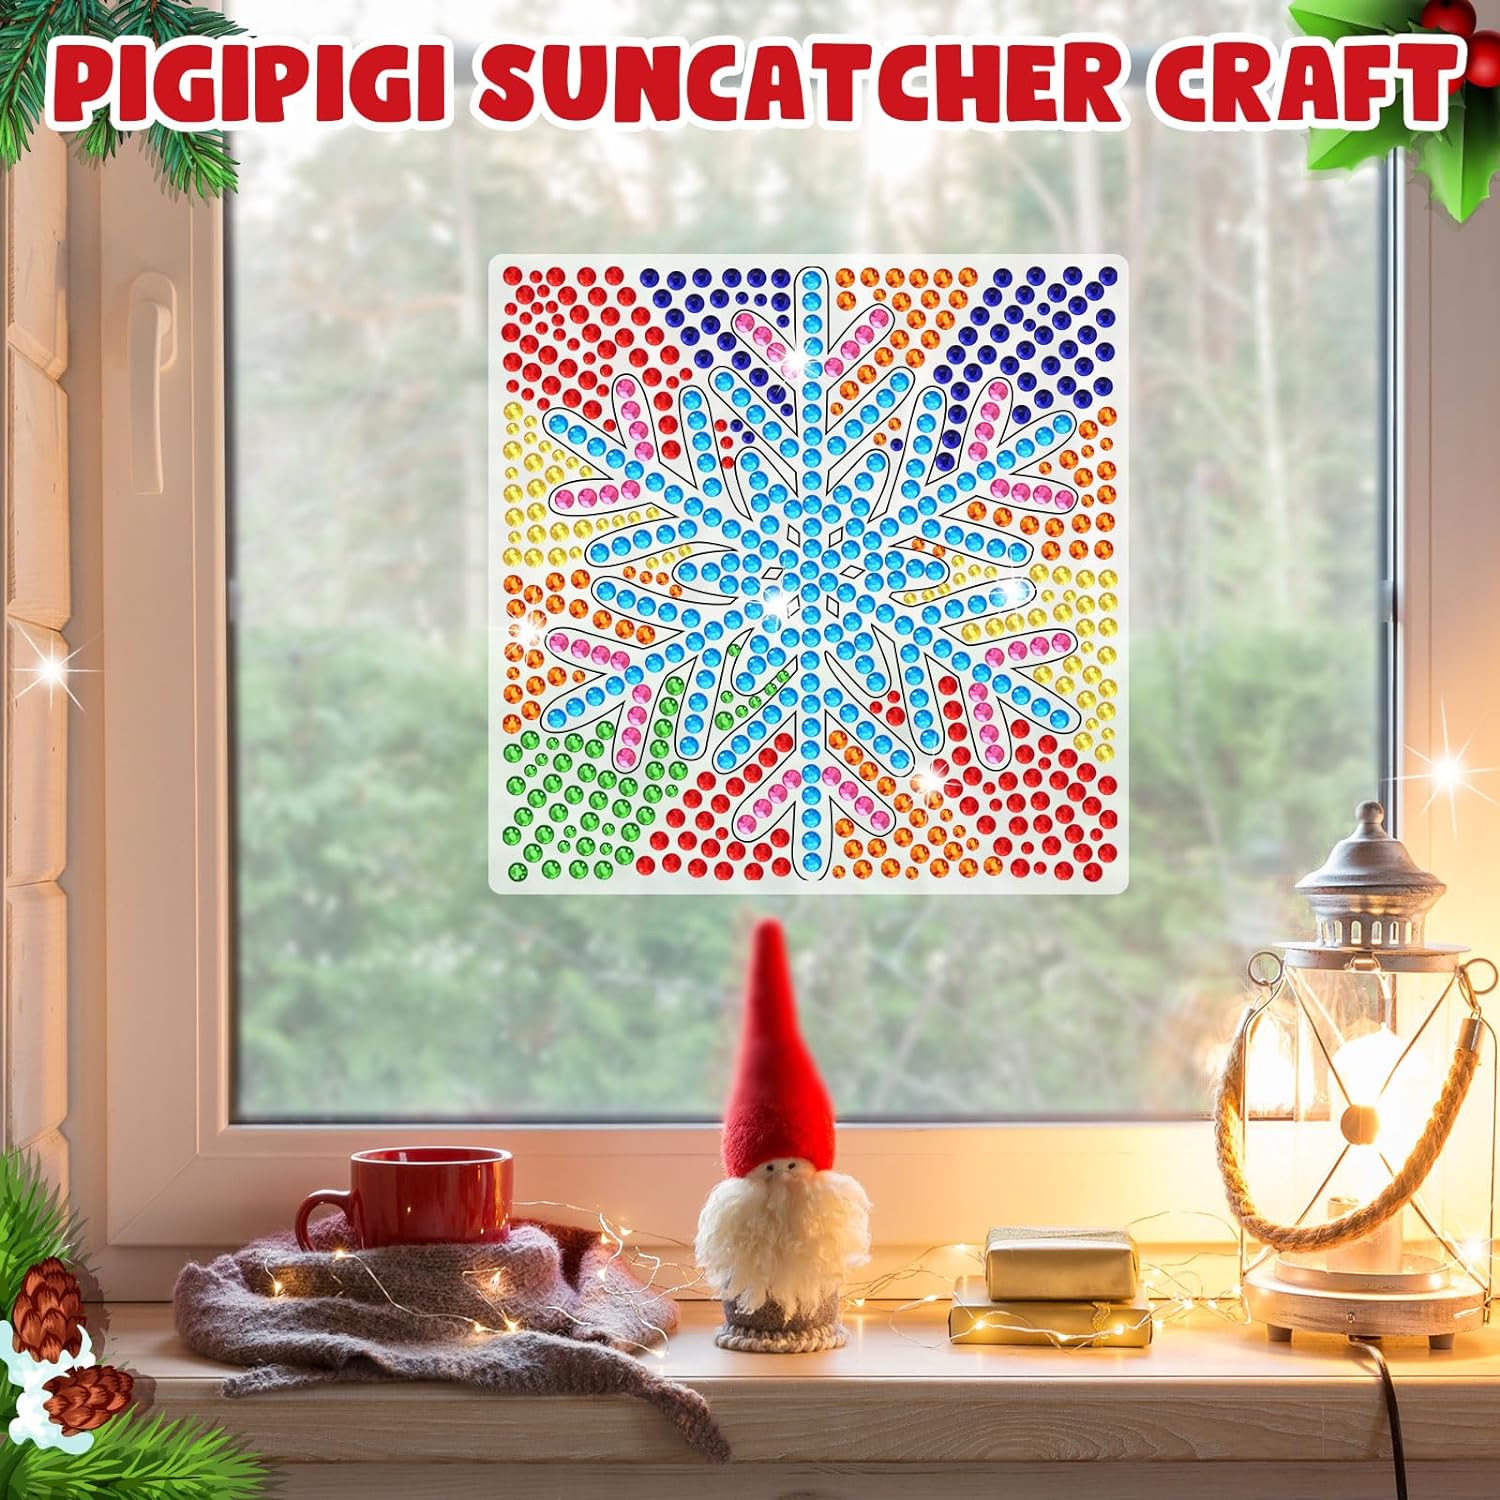 Christmas Diamond Painting Craft Kit, 2-Pack $3.99 when you buy 2 (Reg. $10) – Includes Wreath and Snowflake Designs